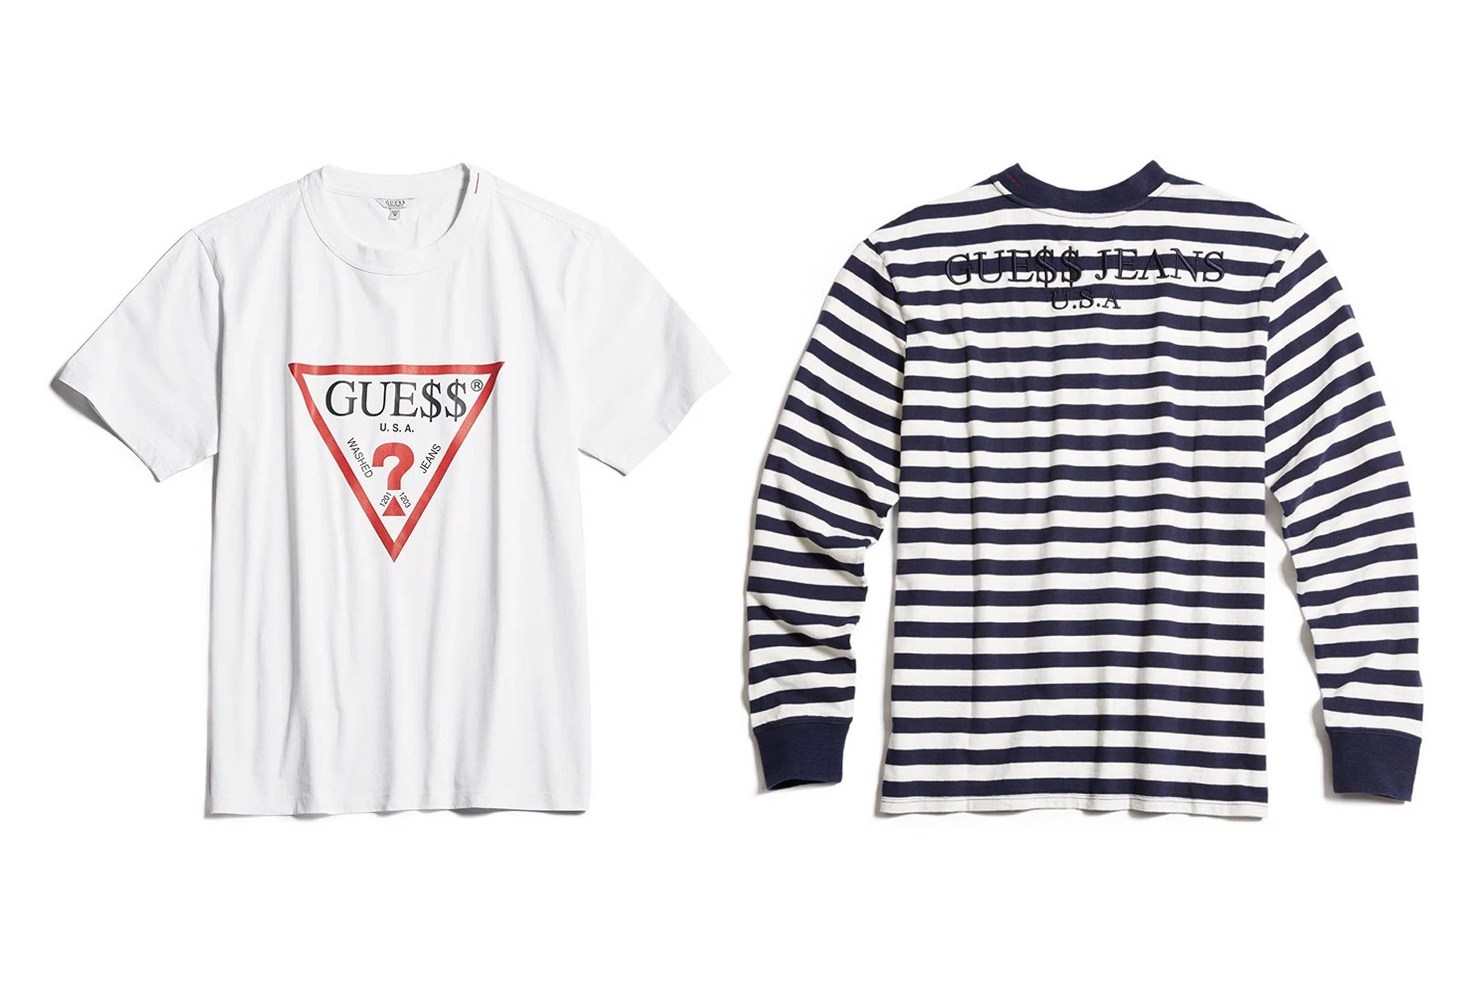 A$AP Mob » A$AP Rocky & GUESS Announce Collection